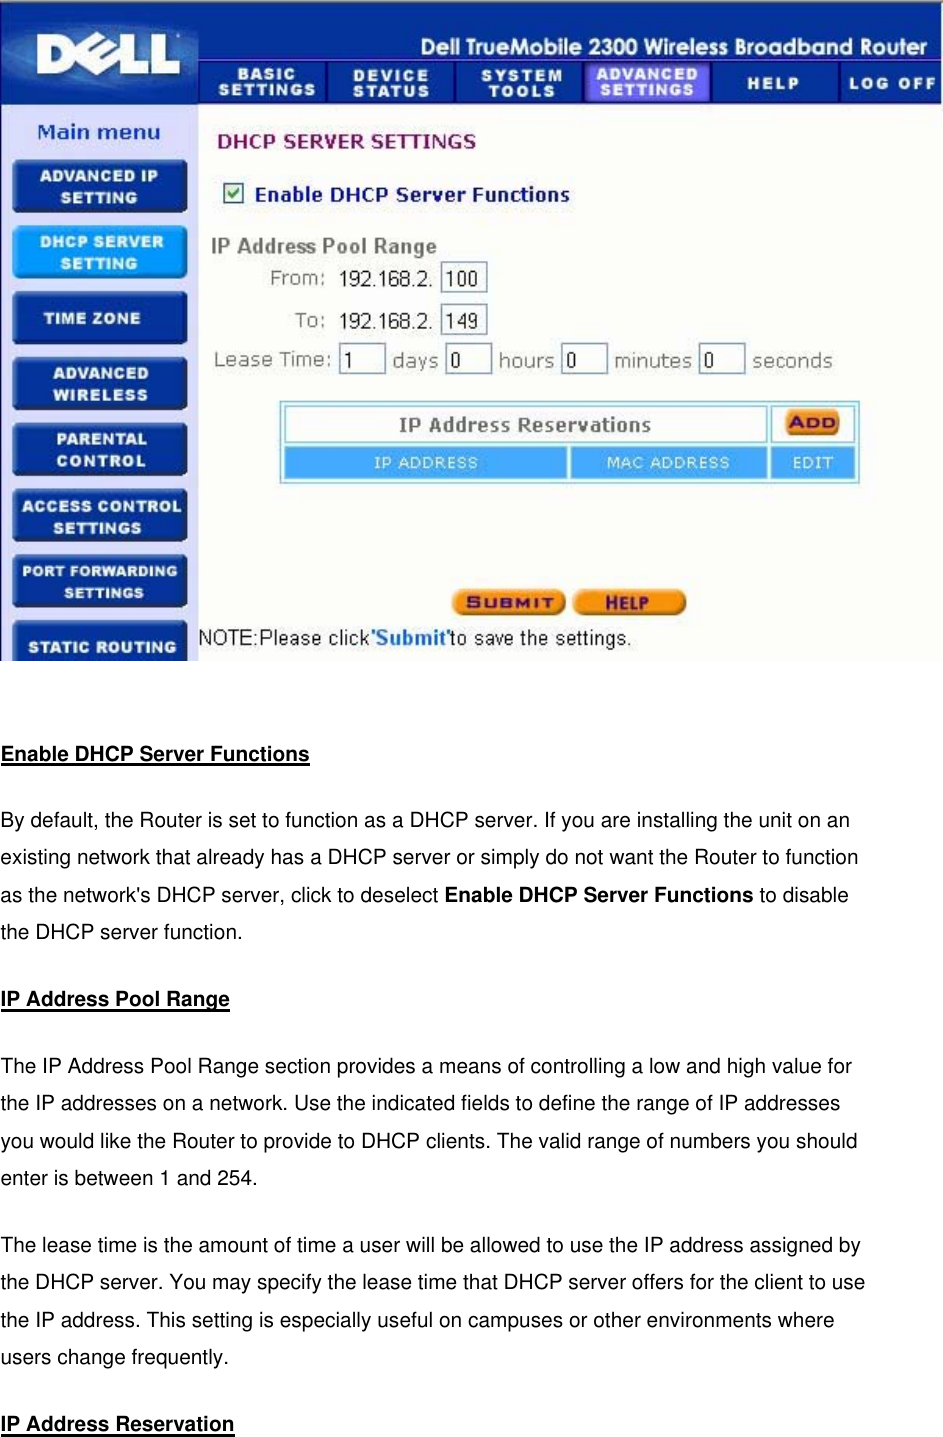   Enable DHCP Server Functions By default, the Router is set to function as a DHCP server. If you are installing the unit on an existing network that already has a DHCP server or simply do not want the Router to function as the network&apos;s DHCP server, click to deselect Enable DHCP Server Functions to disable the DHCP server function. IP Address Pool Range The IP Address Pool Range section provides a means of controlling a low and high value for the IP addresses on a network. Use the indicated fields to define the range of IP addresses you would like the Router to provide to DHCP clients. The valid range of numbers you should enter is between 1 and 254.   The lease time is the amount of time a user will be allowed to use the IP address assigned by the DHCP server. You may specify the lease time that DHCP server offers for the client to use the IP address. This setting is especially useful on campuses or other environments where users change frequently. IP Address Reservation 